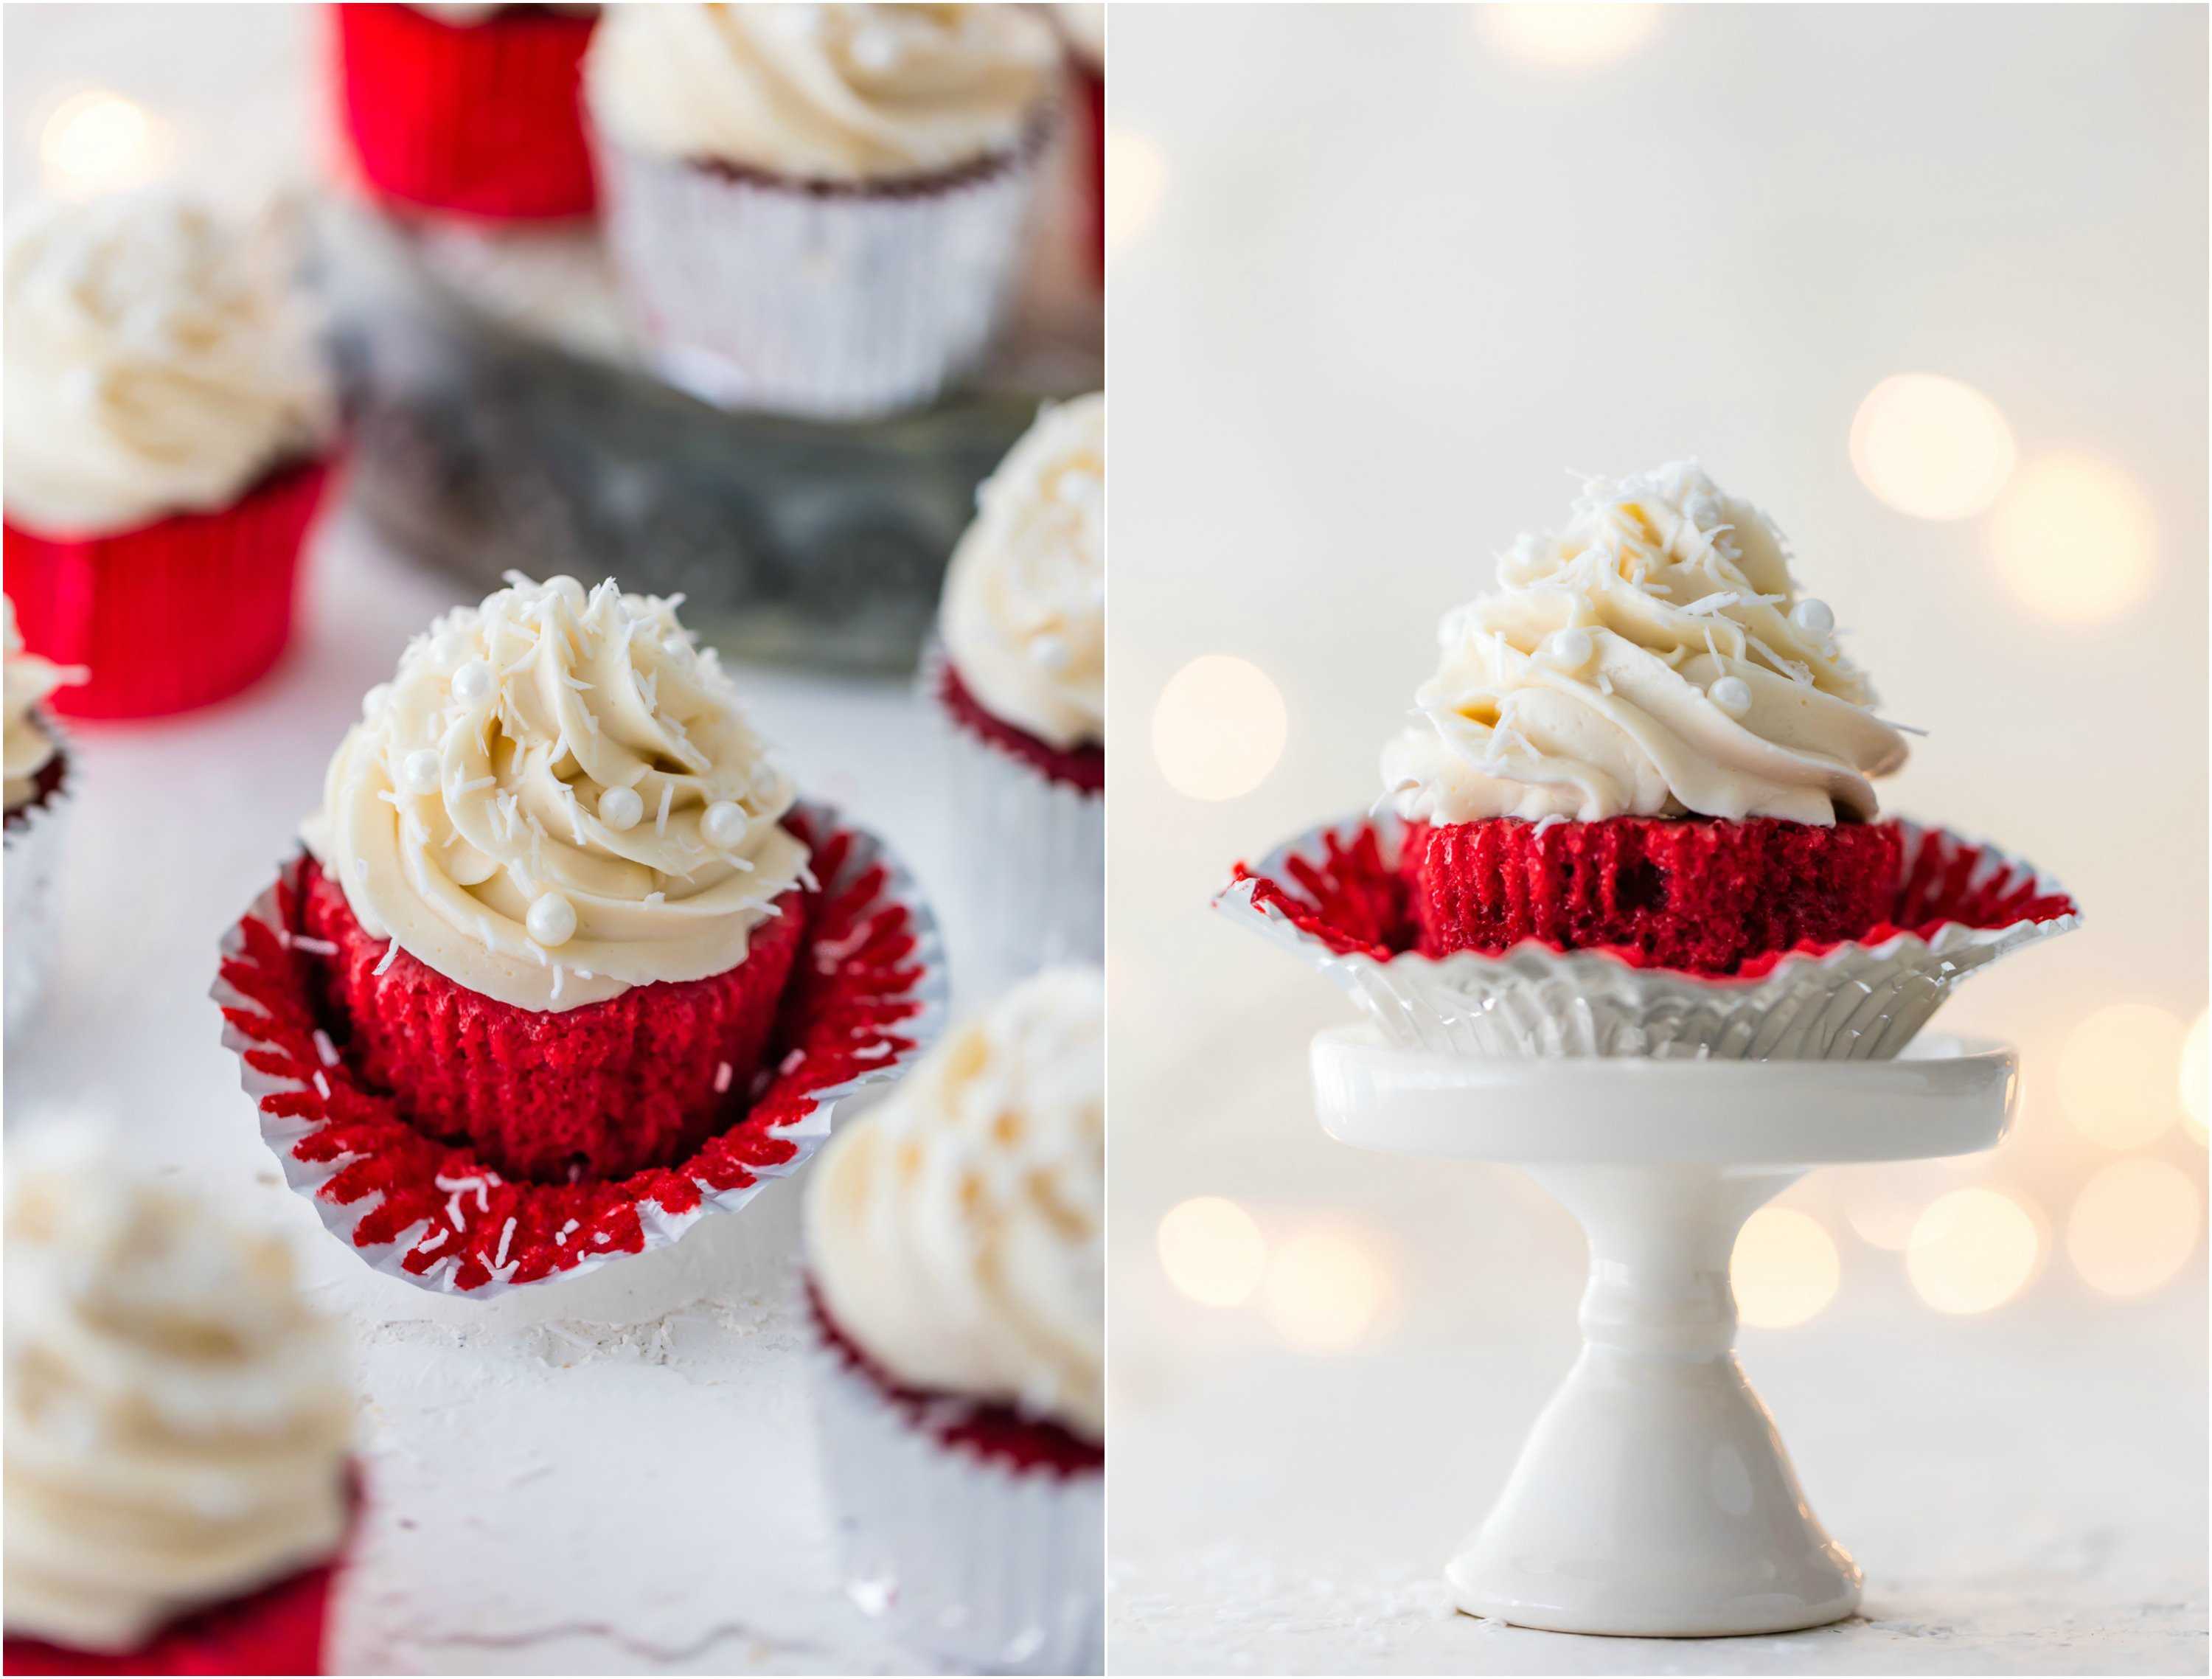 These Red Velvet Cupcakes are the absolute BEST Red Velvet Cupcake Recipe you will ever try. Red Velvet Cake is the ultimate holiday dessert! You haven't lived unless you've tried these classic Red Velvet Cupcakes with the most amazing cream cheese frosting! Classic, delicious, EASY and perfect. With a Red Velvet Cupcake in hand, you're ready for Christmas or Valentine's Day.